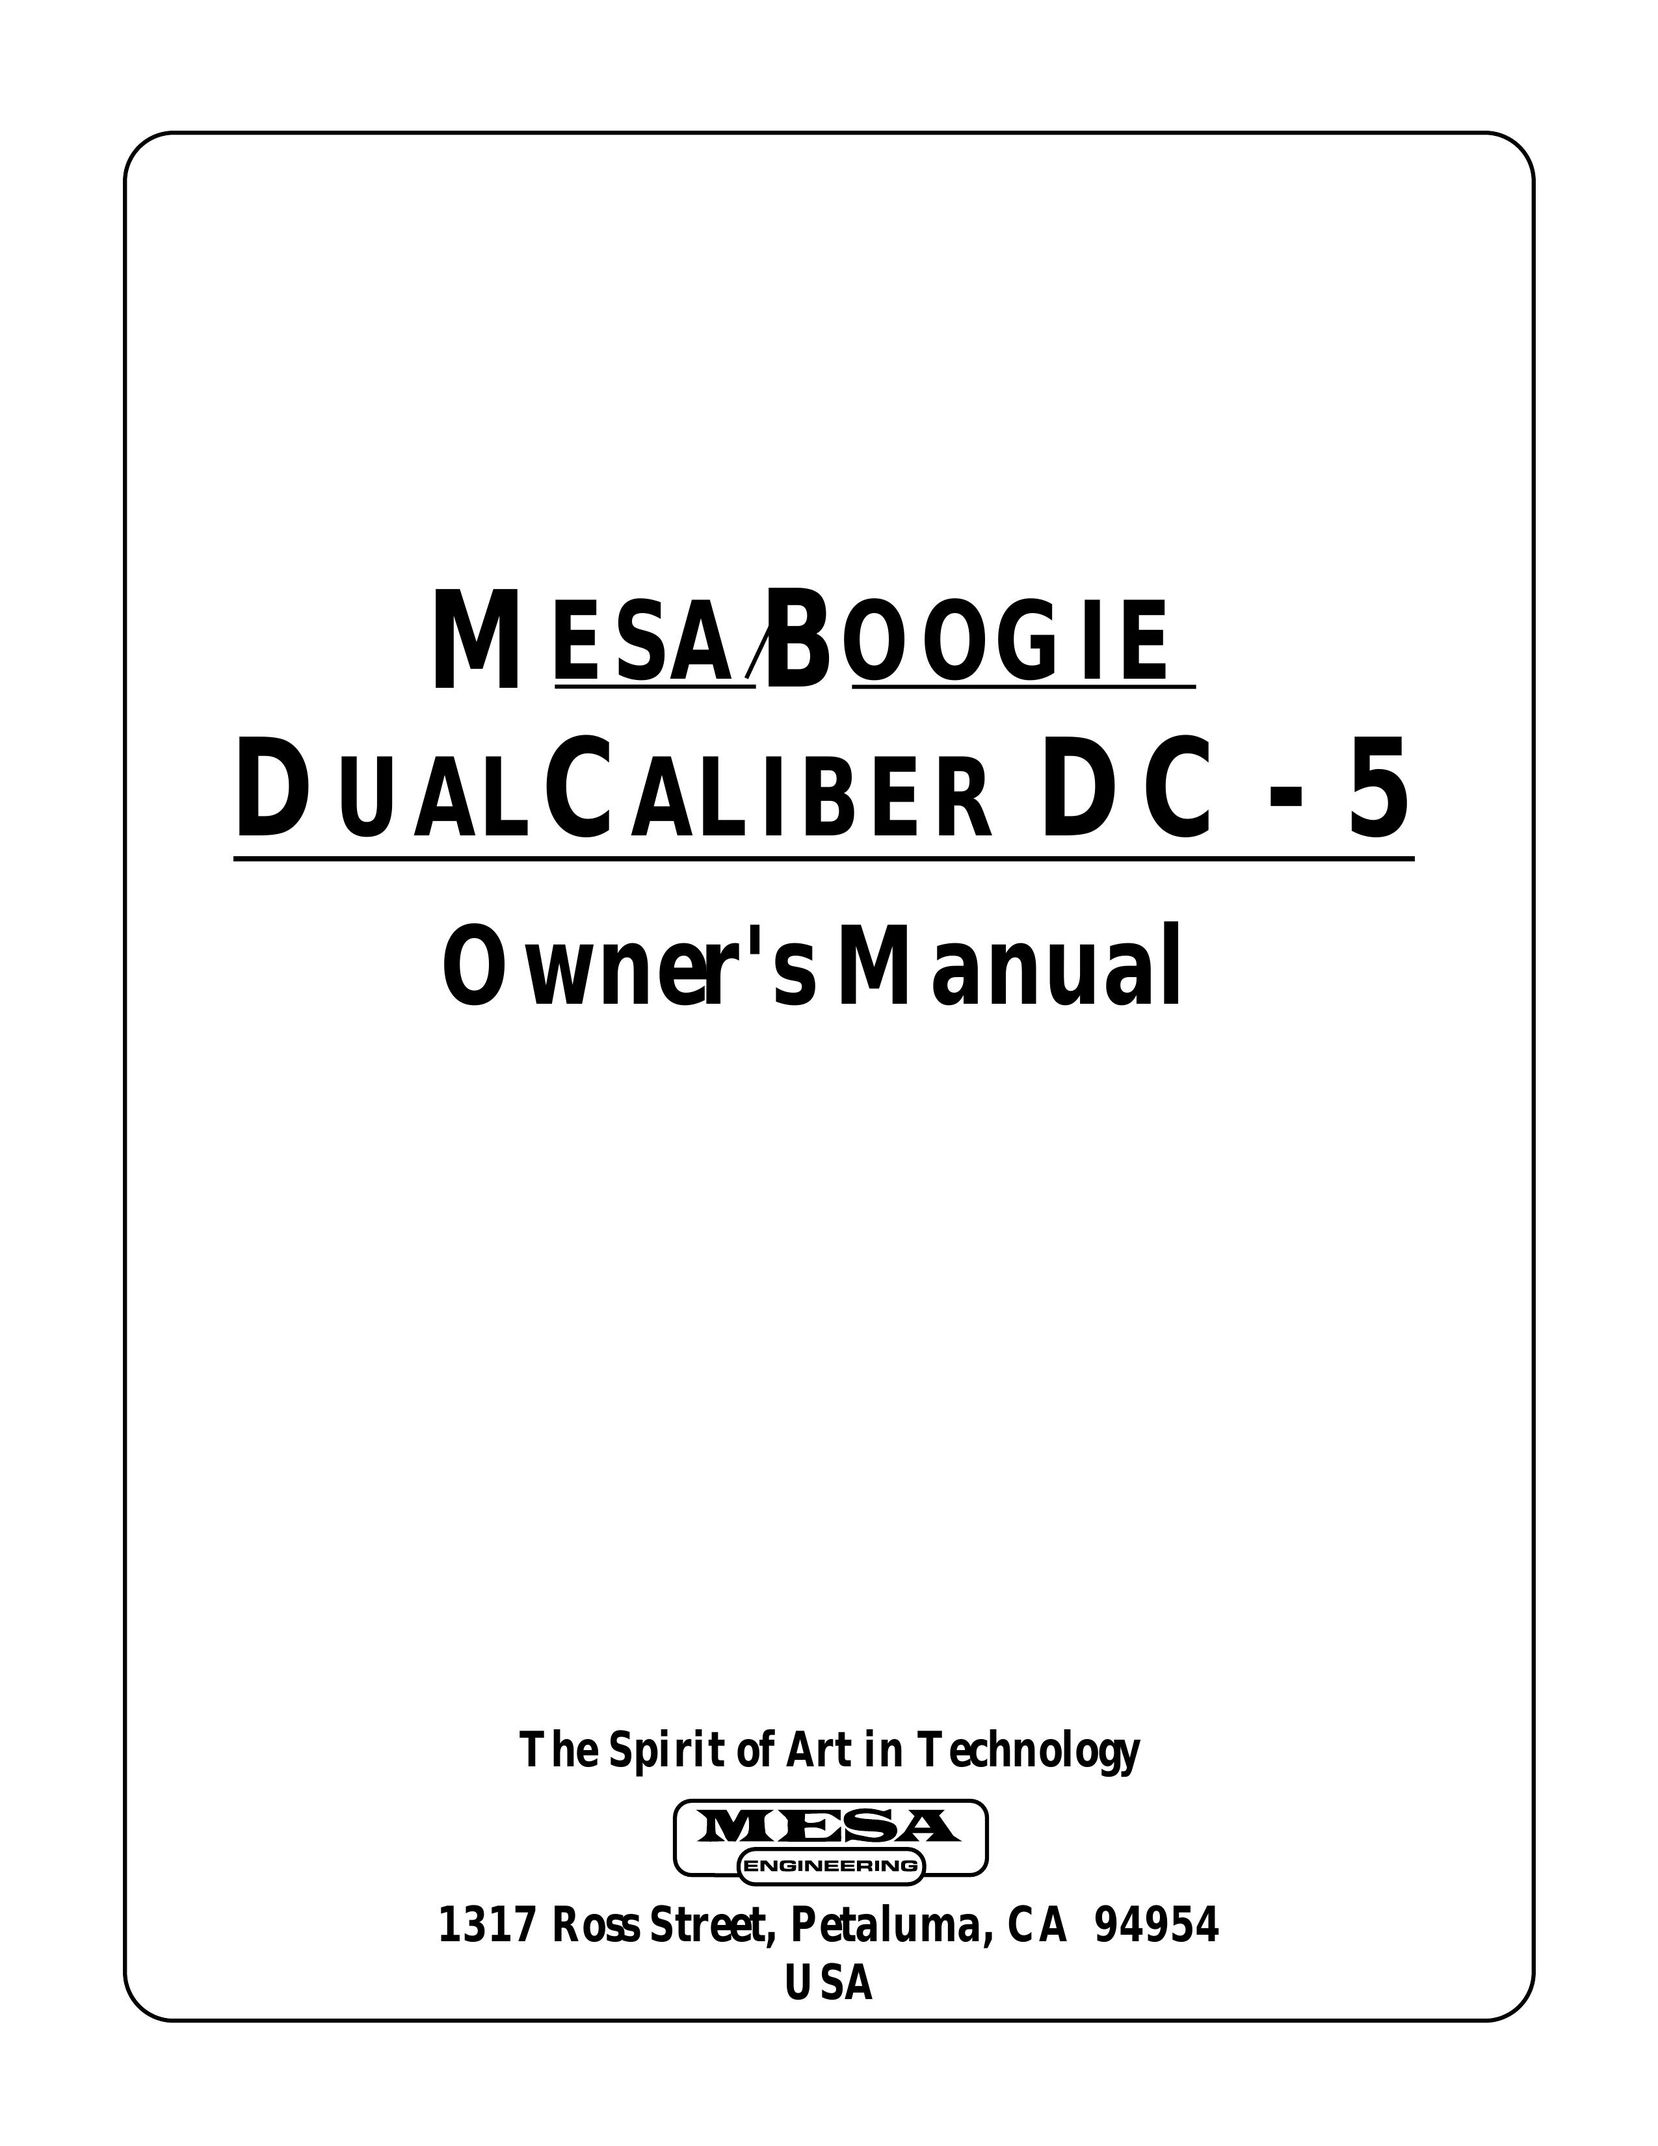 Mesa/Boogie DC5 Stereo Amplifier User Manual